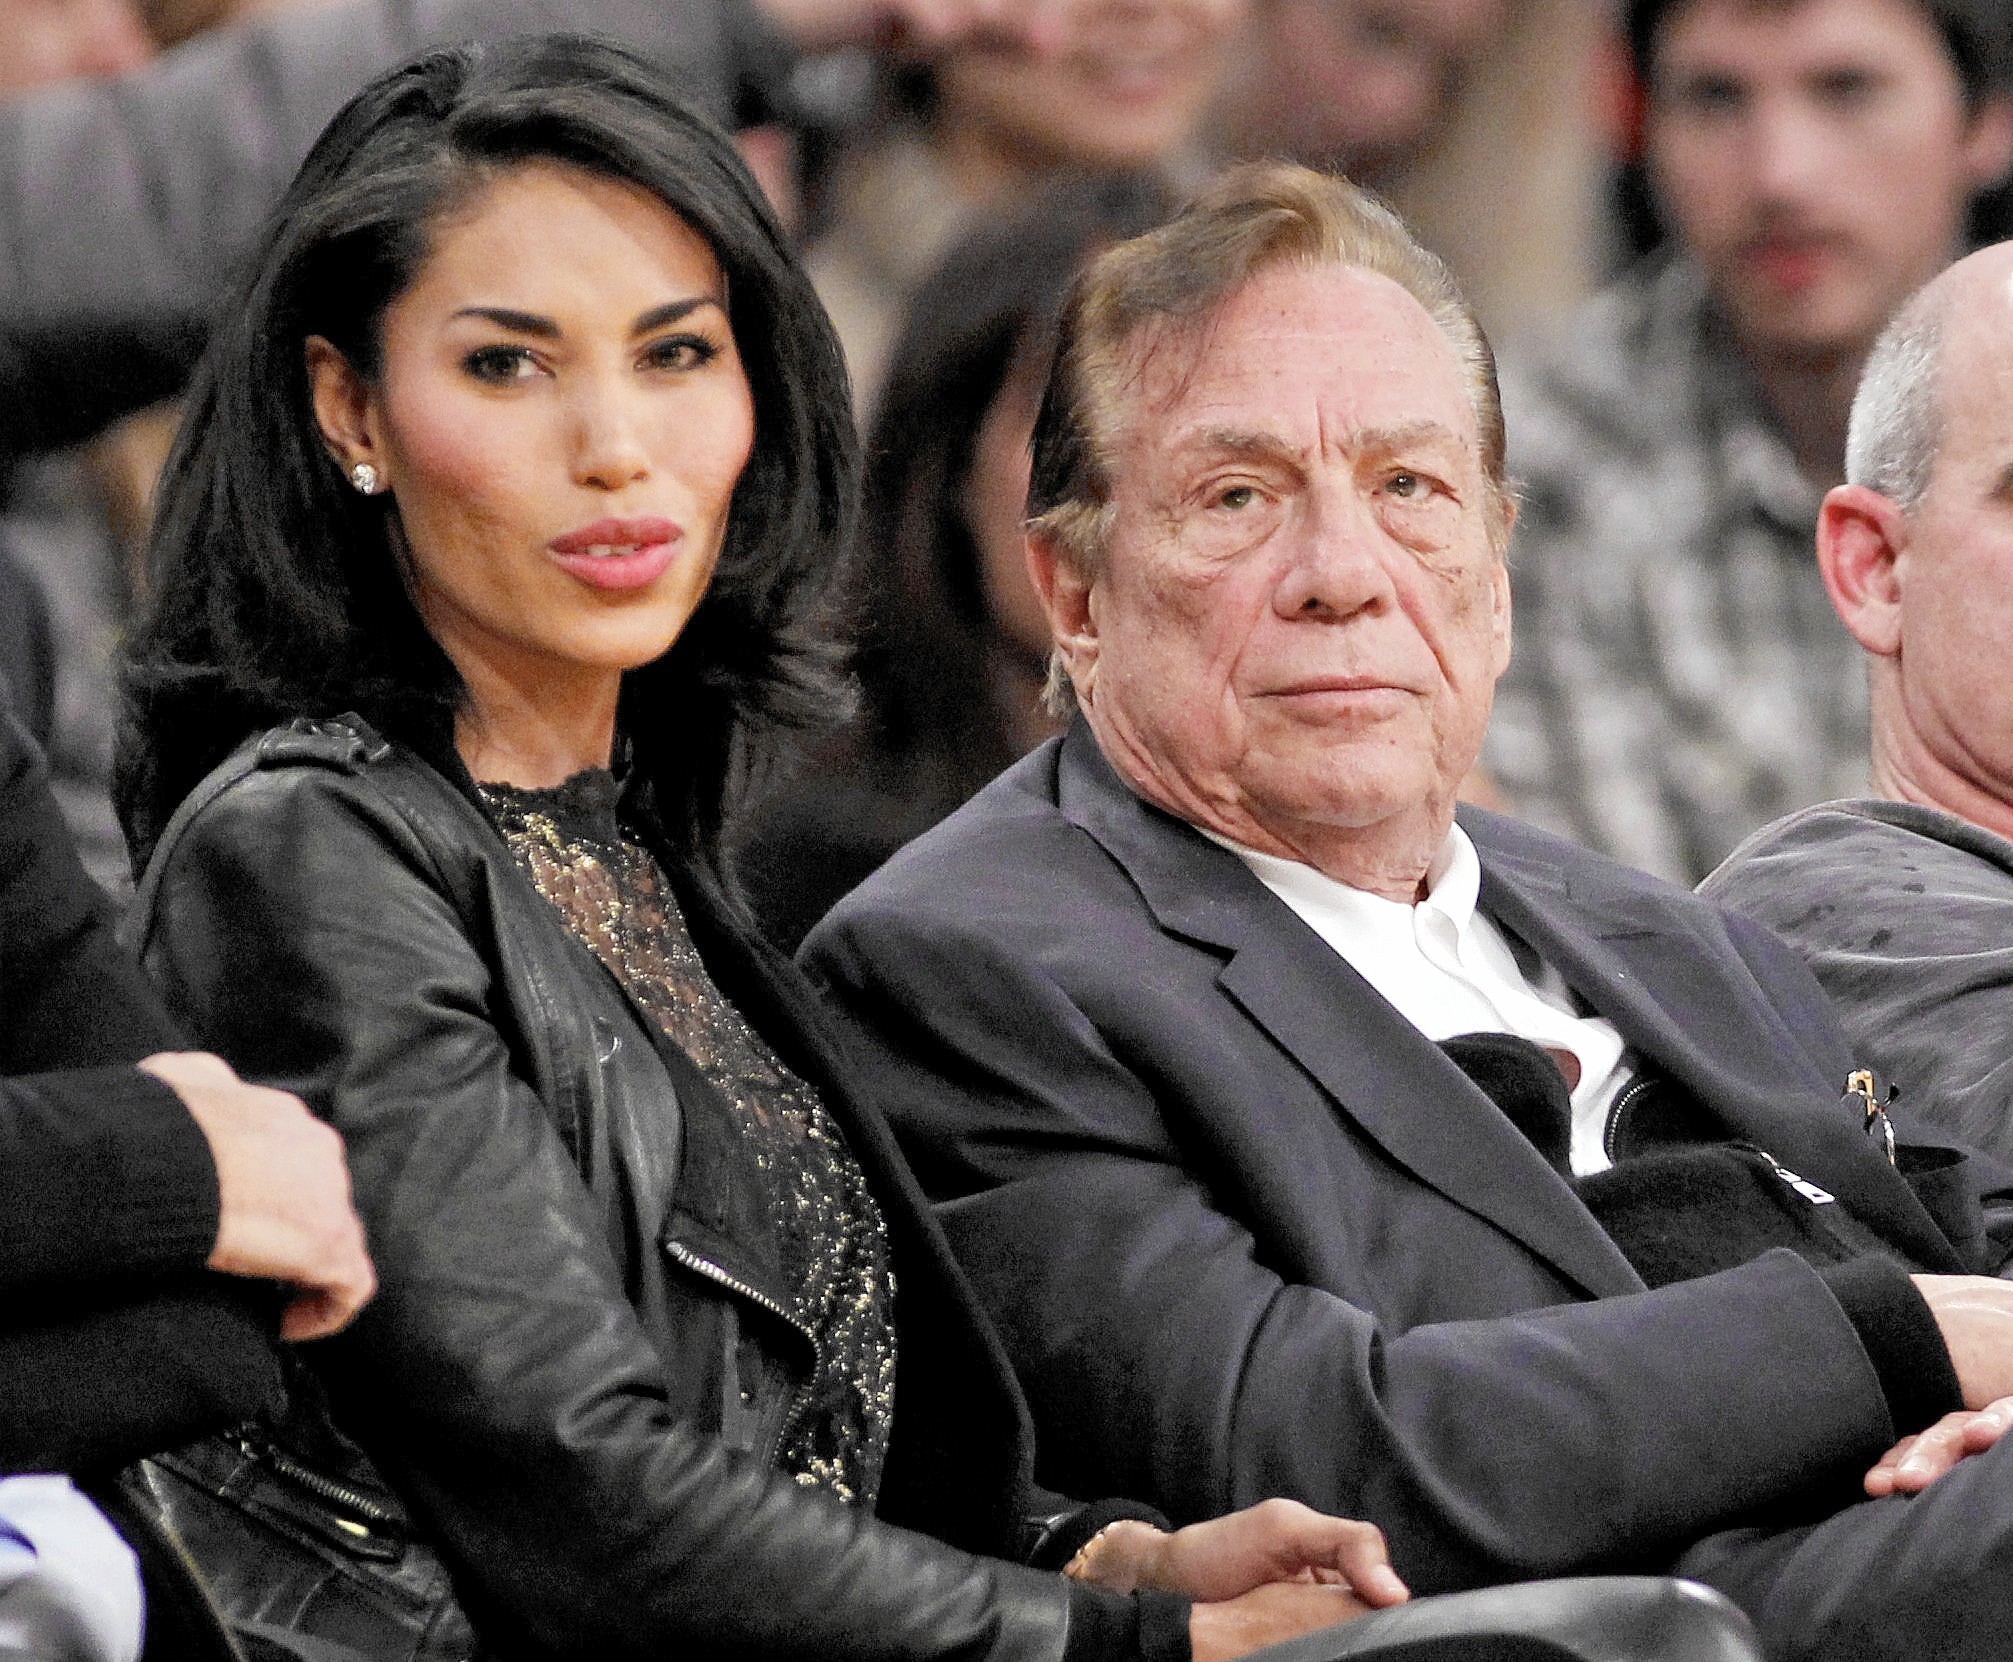 Recording could come back to bite Donald Sterling girlfriend - Chicago Tribune2013 x 1662